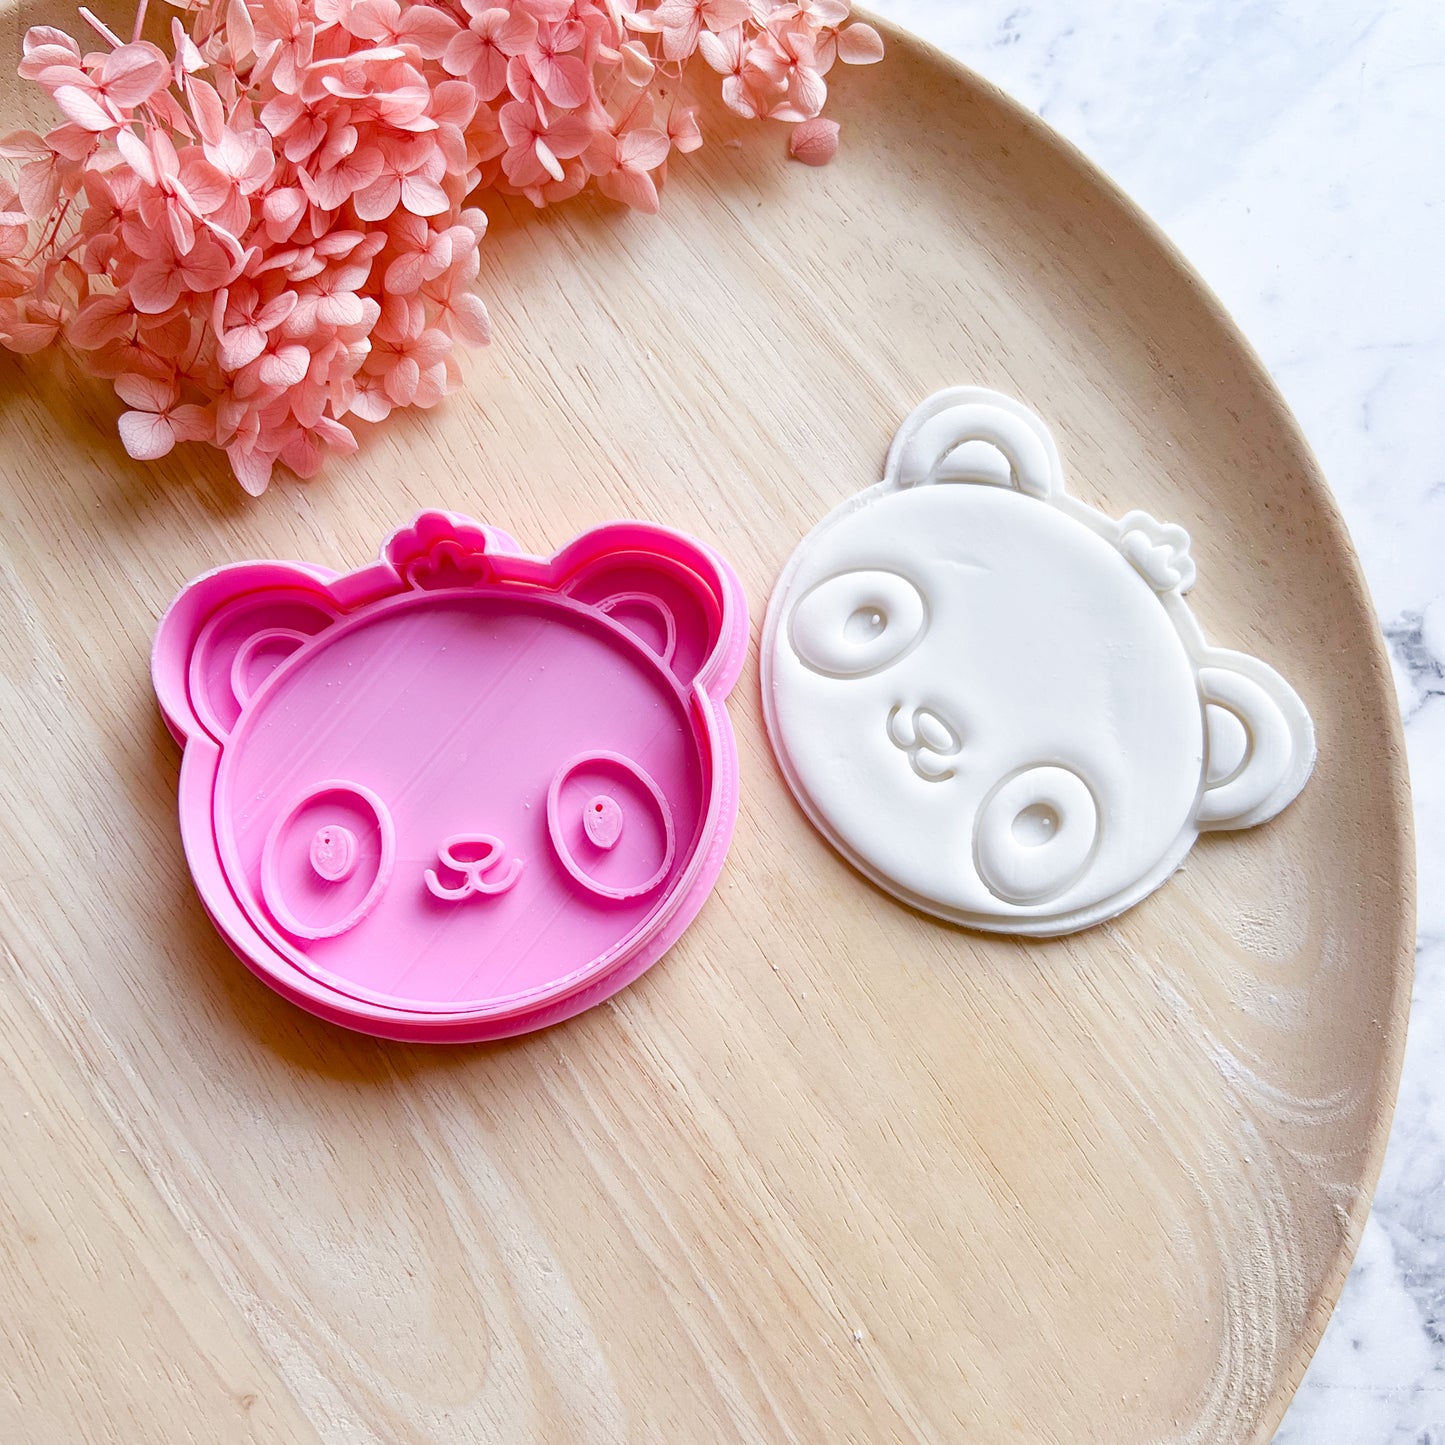 Baby Panda Cookie Cutter & Stamp